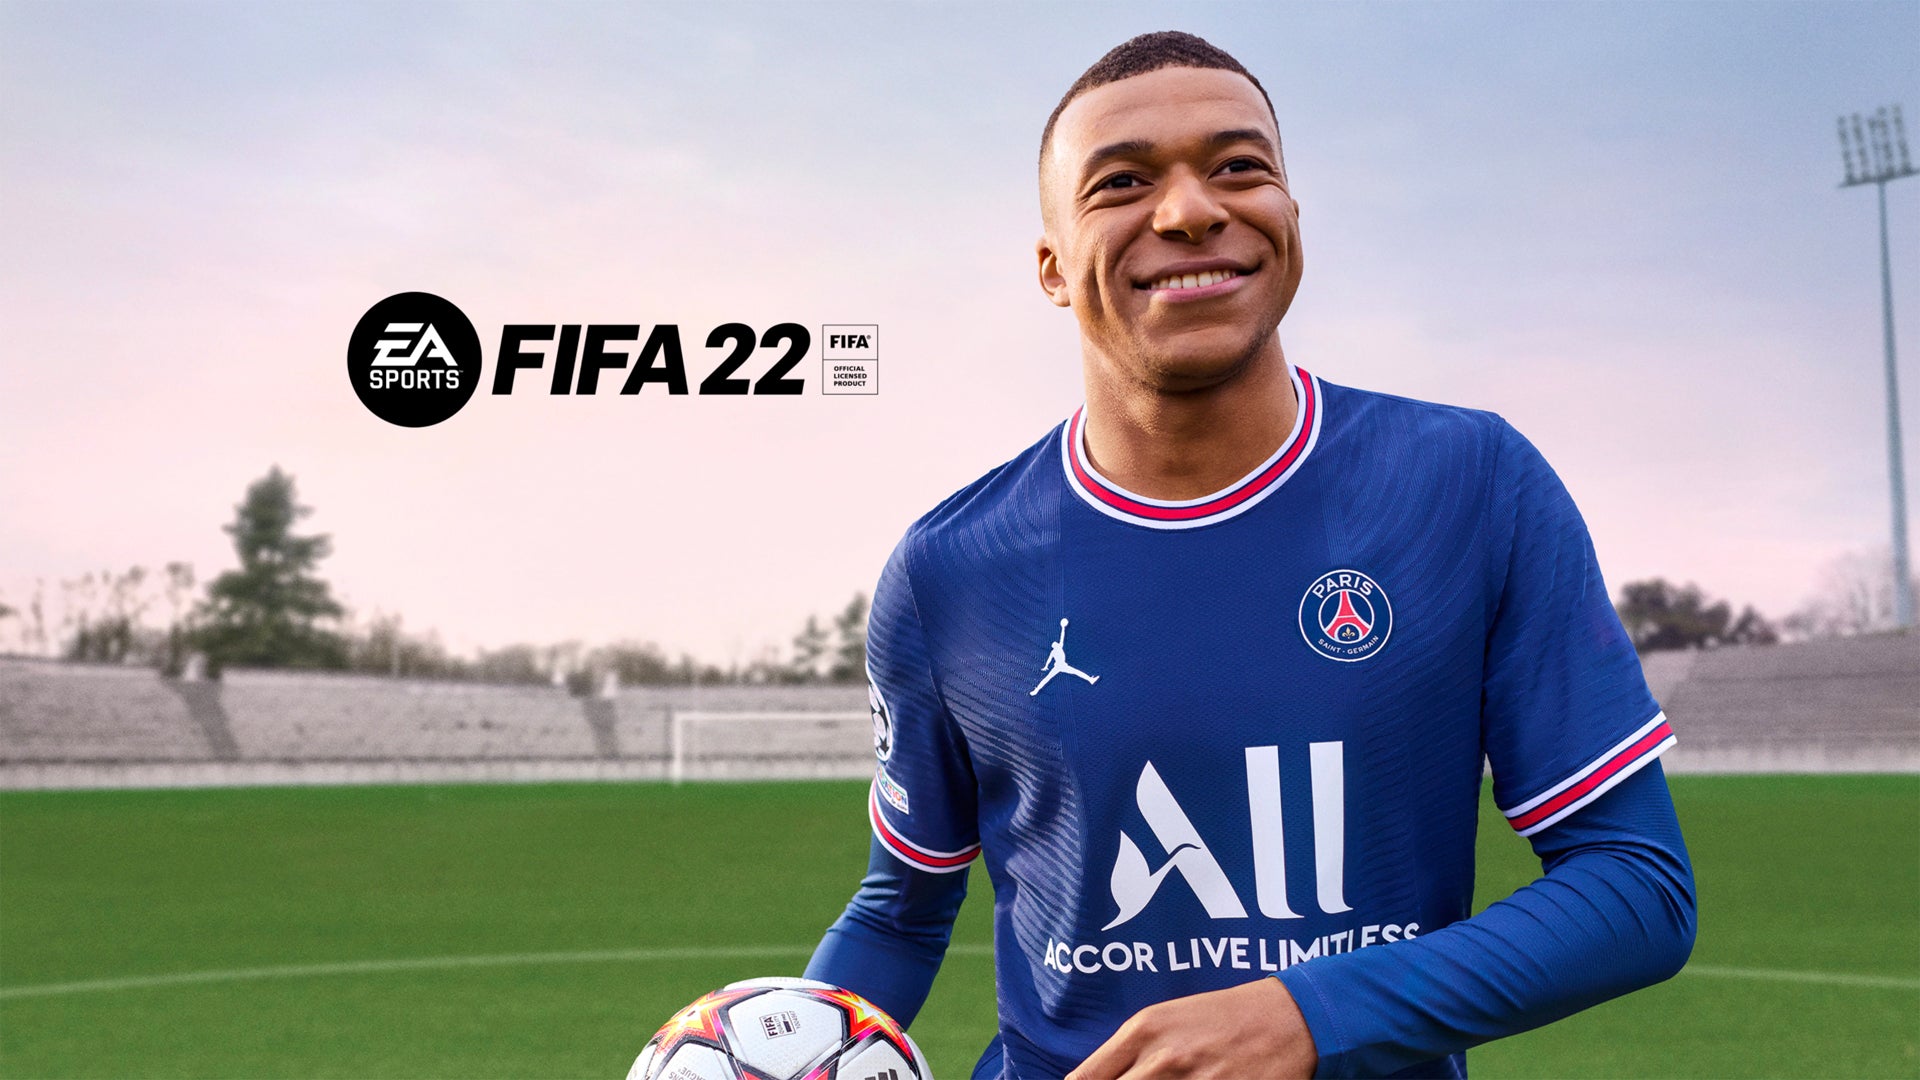 Image for EA says FIFA 22's player engagement is “highest ever”